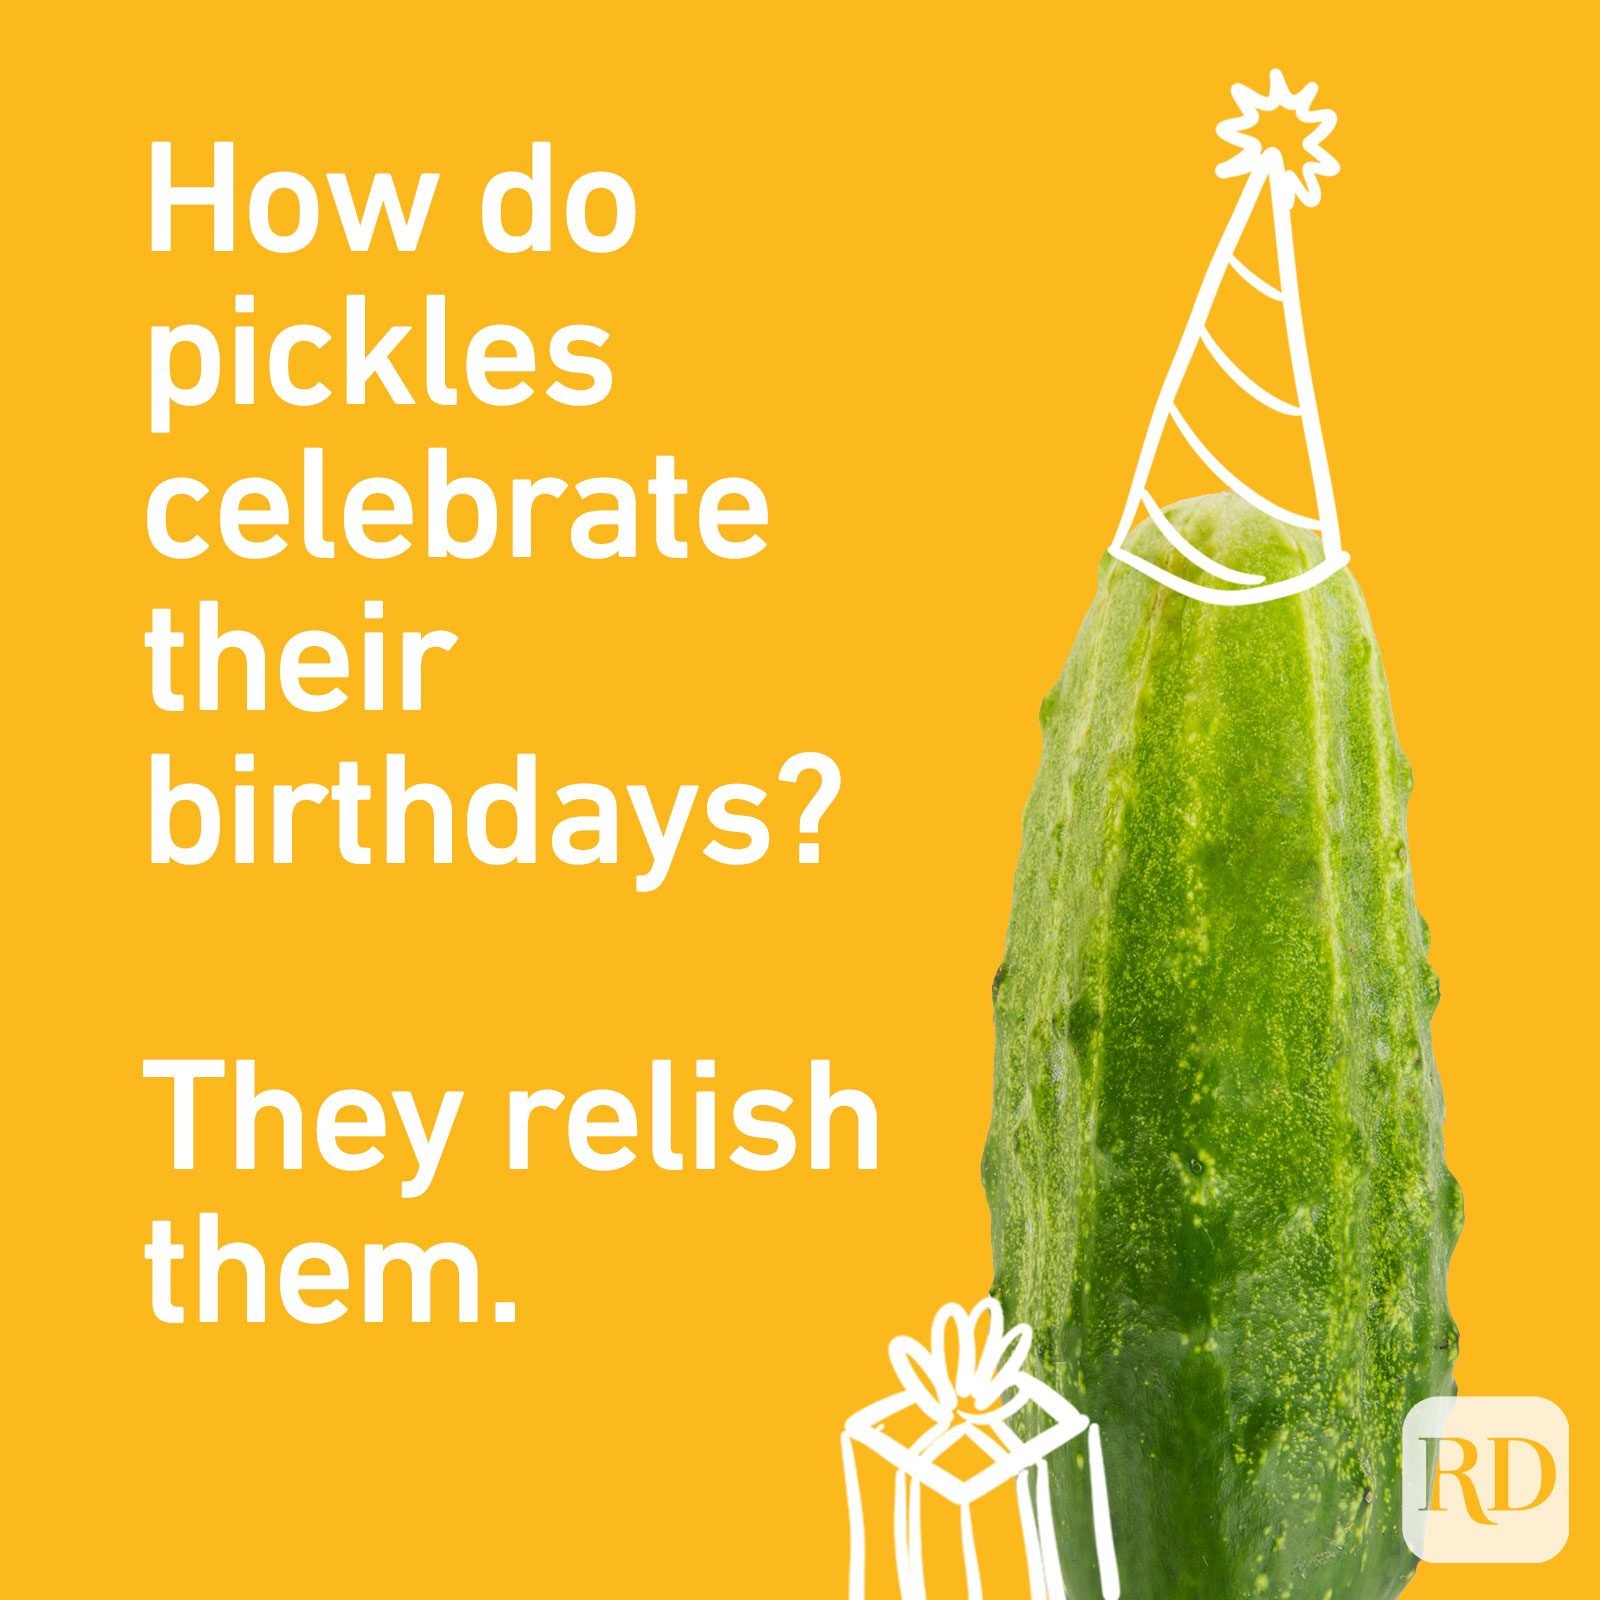 funny birthday jokes for adults